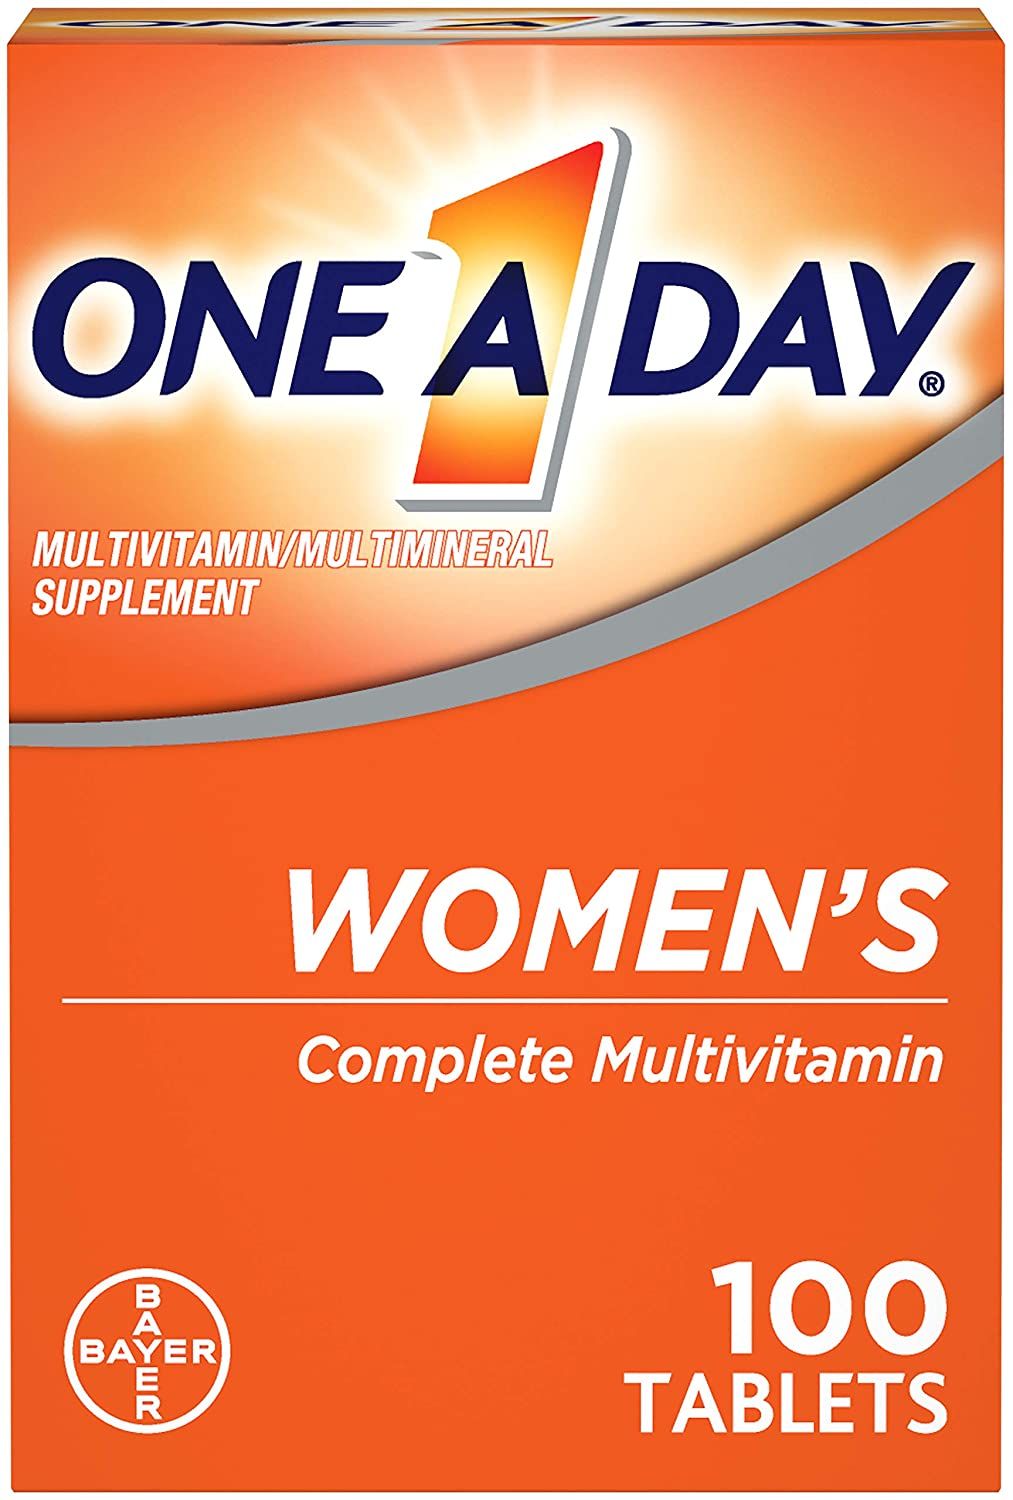 One A Day Women's Multivitamin Tablets - 100 ct